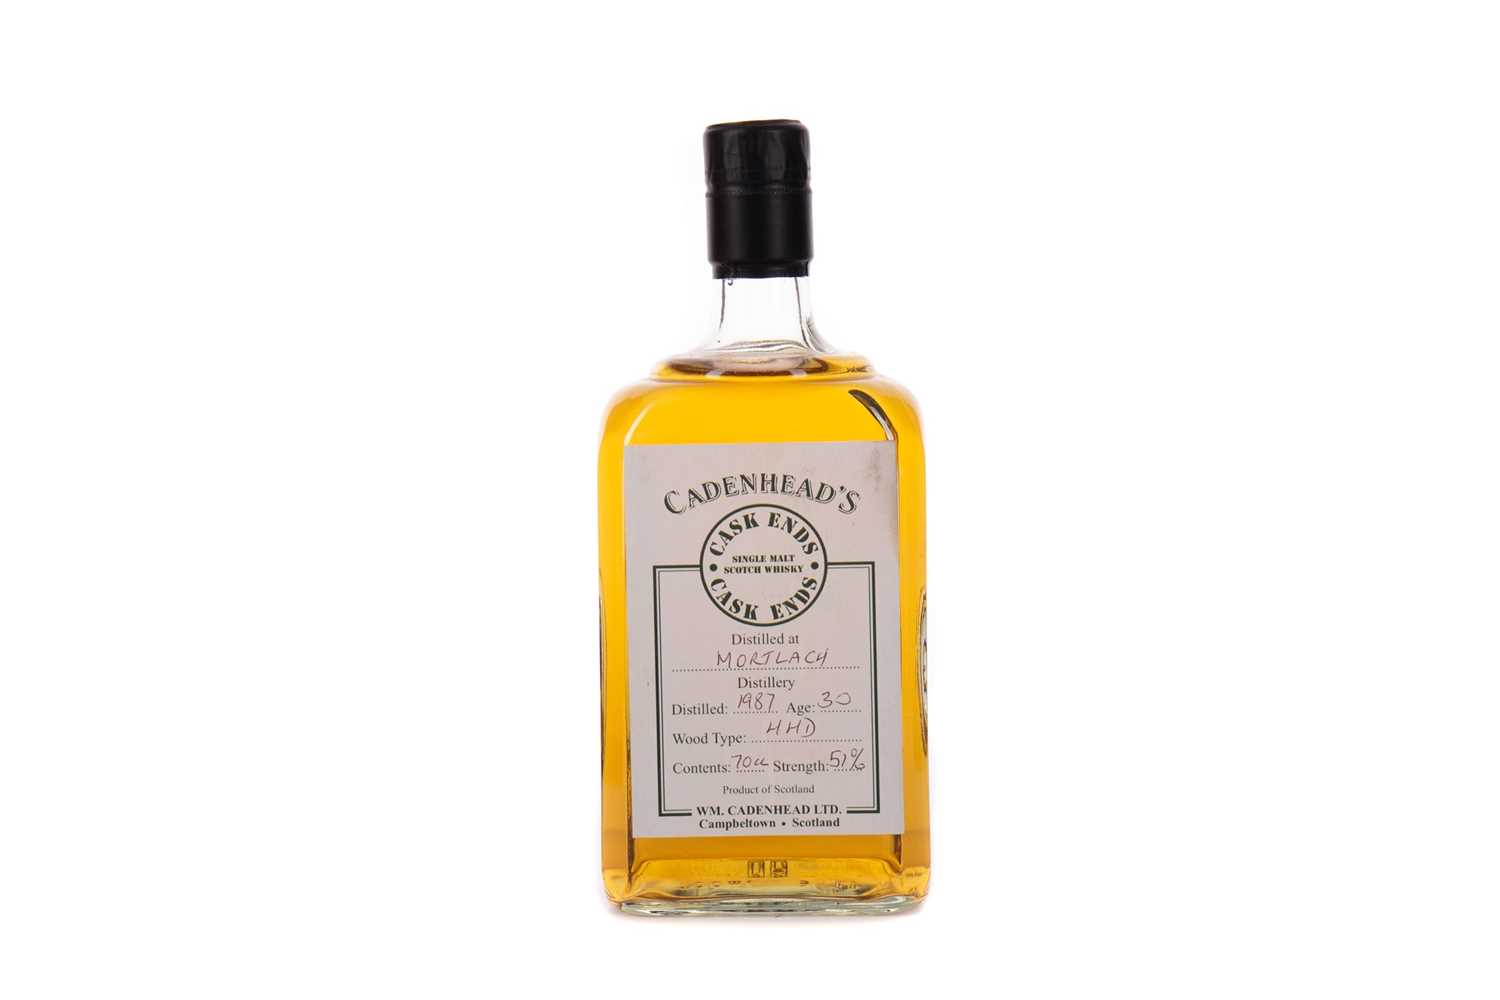 Lot 59 - MORTLACH 1987 CADENHEAD'S CASK ENDS AGED 30 YEARS